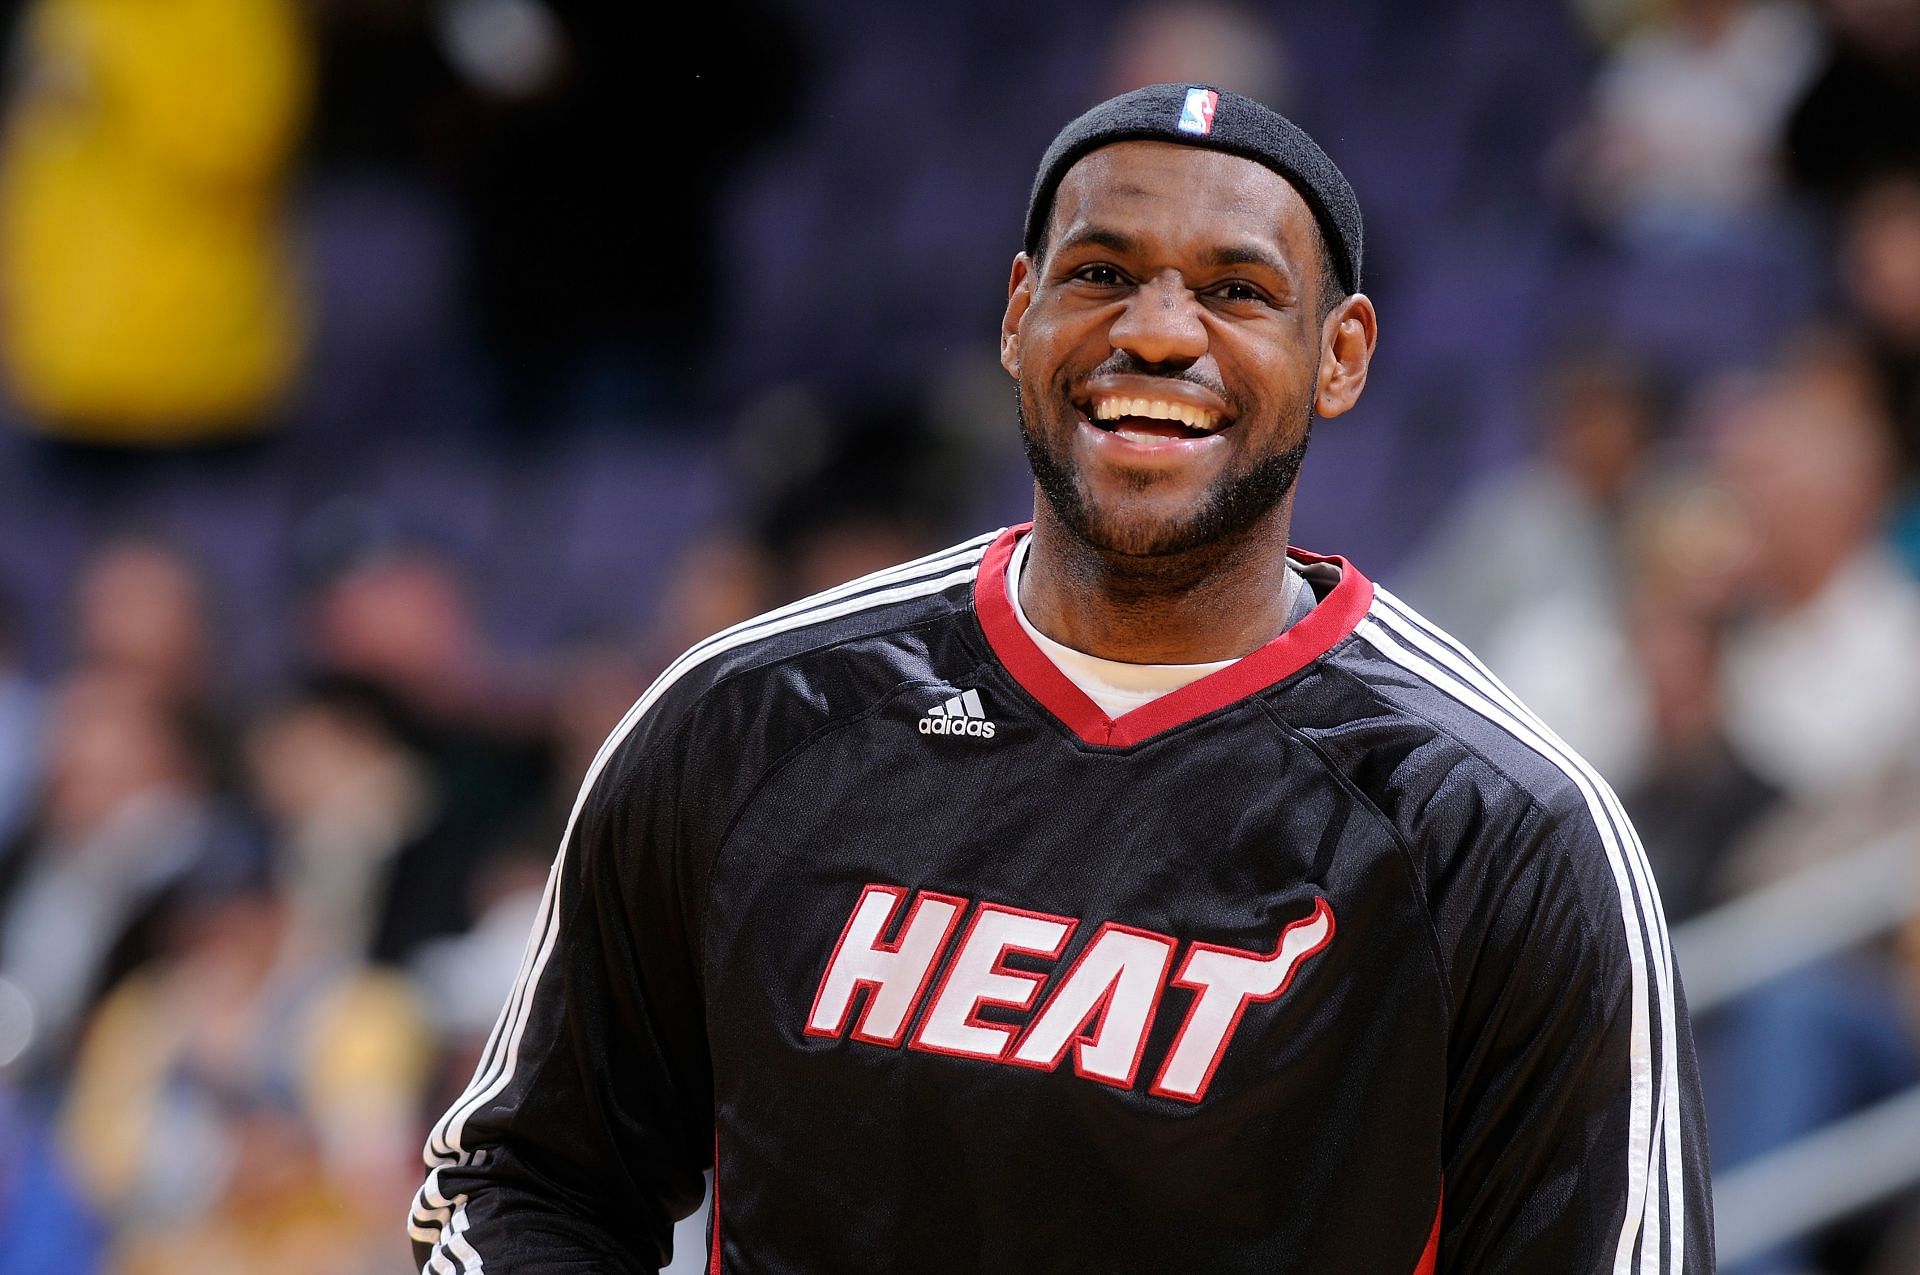 LeBron James #6 of the Miami Heat in 2010